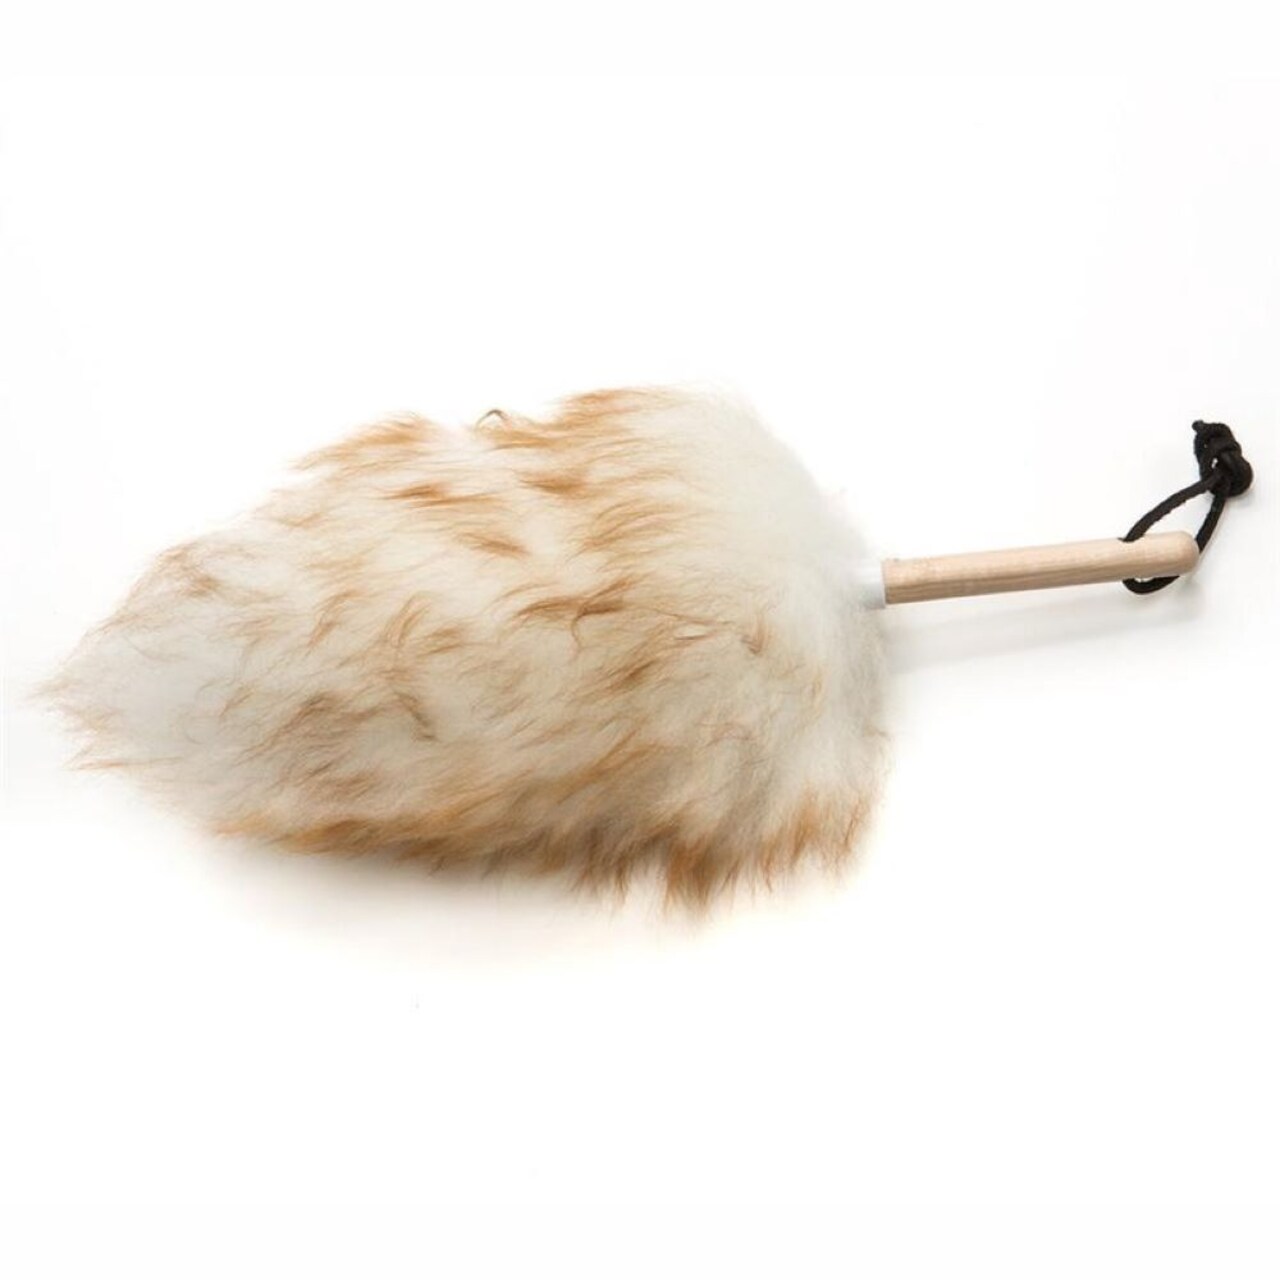 Wool Shop Lambswool Duster, 10 Inches with Wood Handle and Leather Hanger